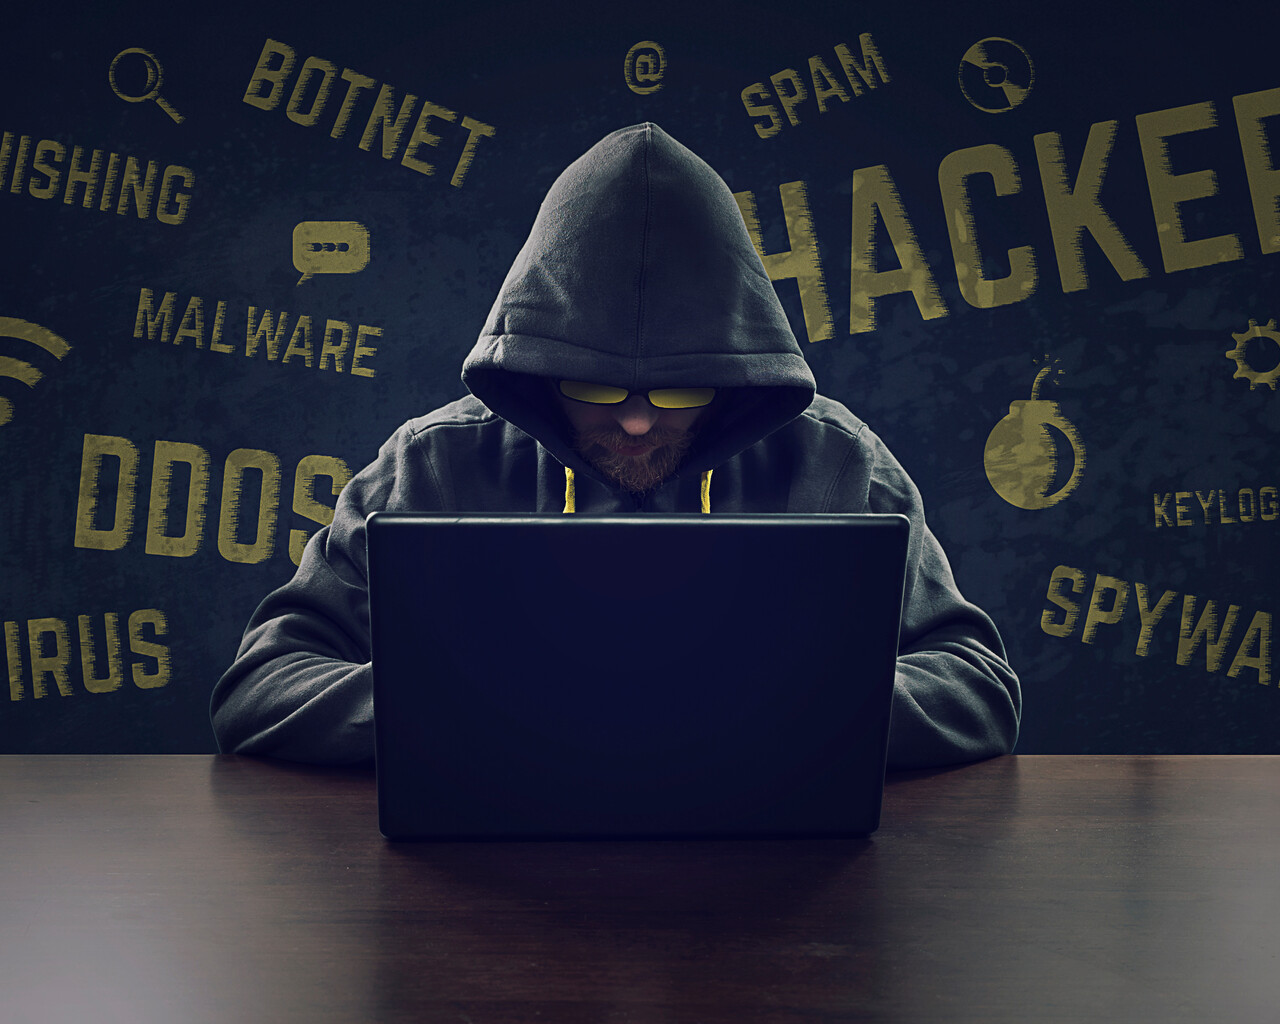 Most Popular Hacker Wallpapers Images